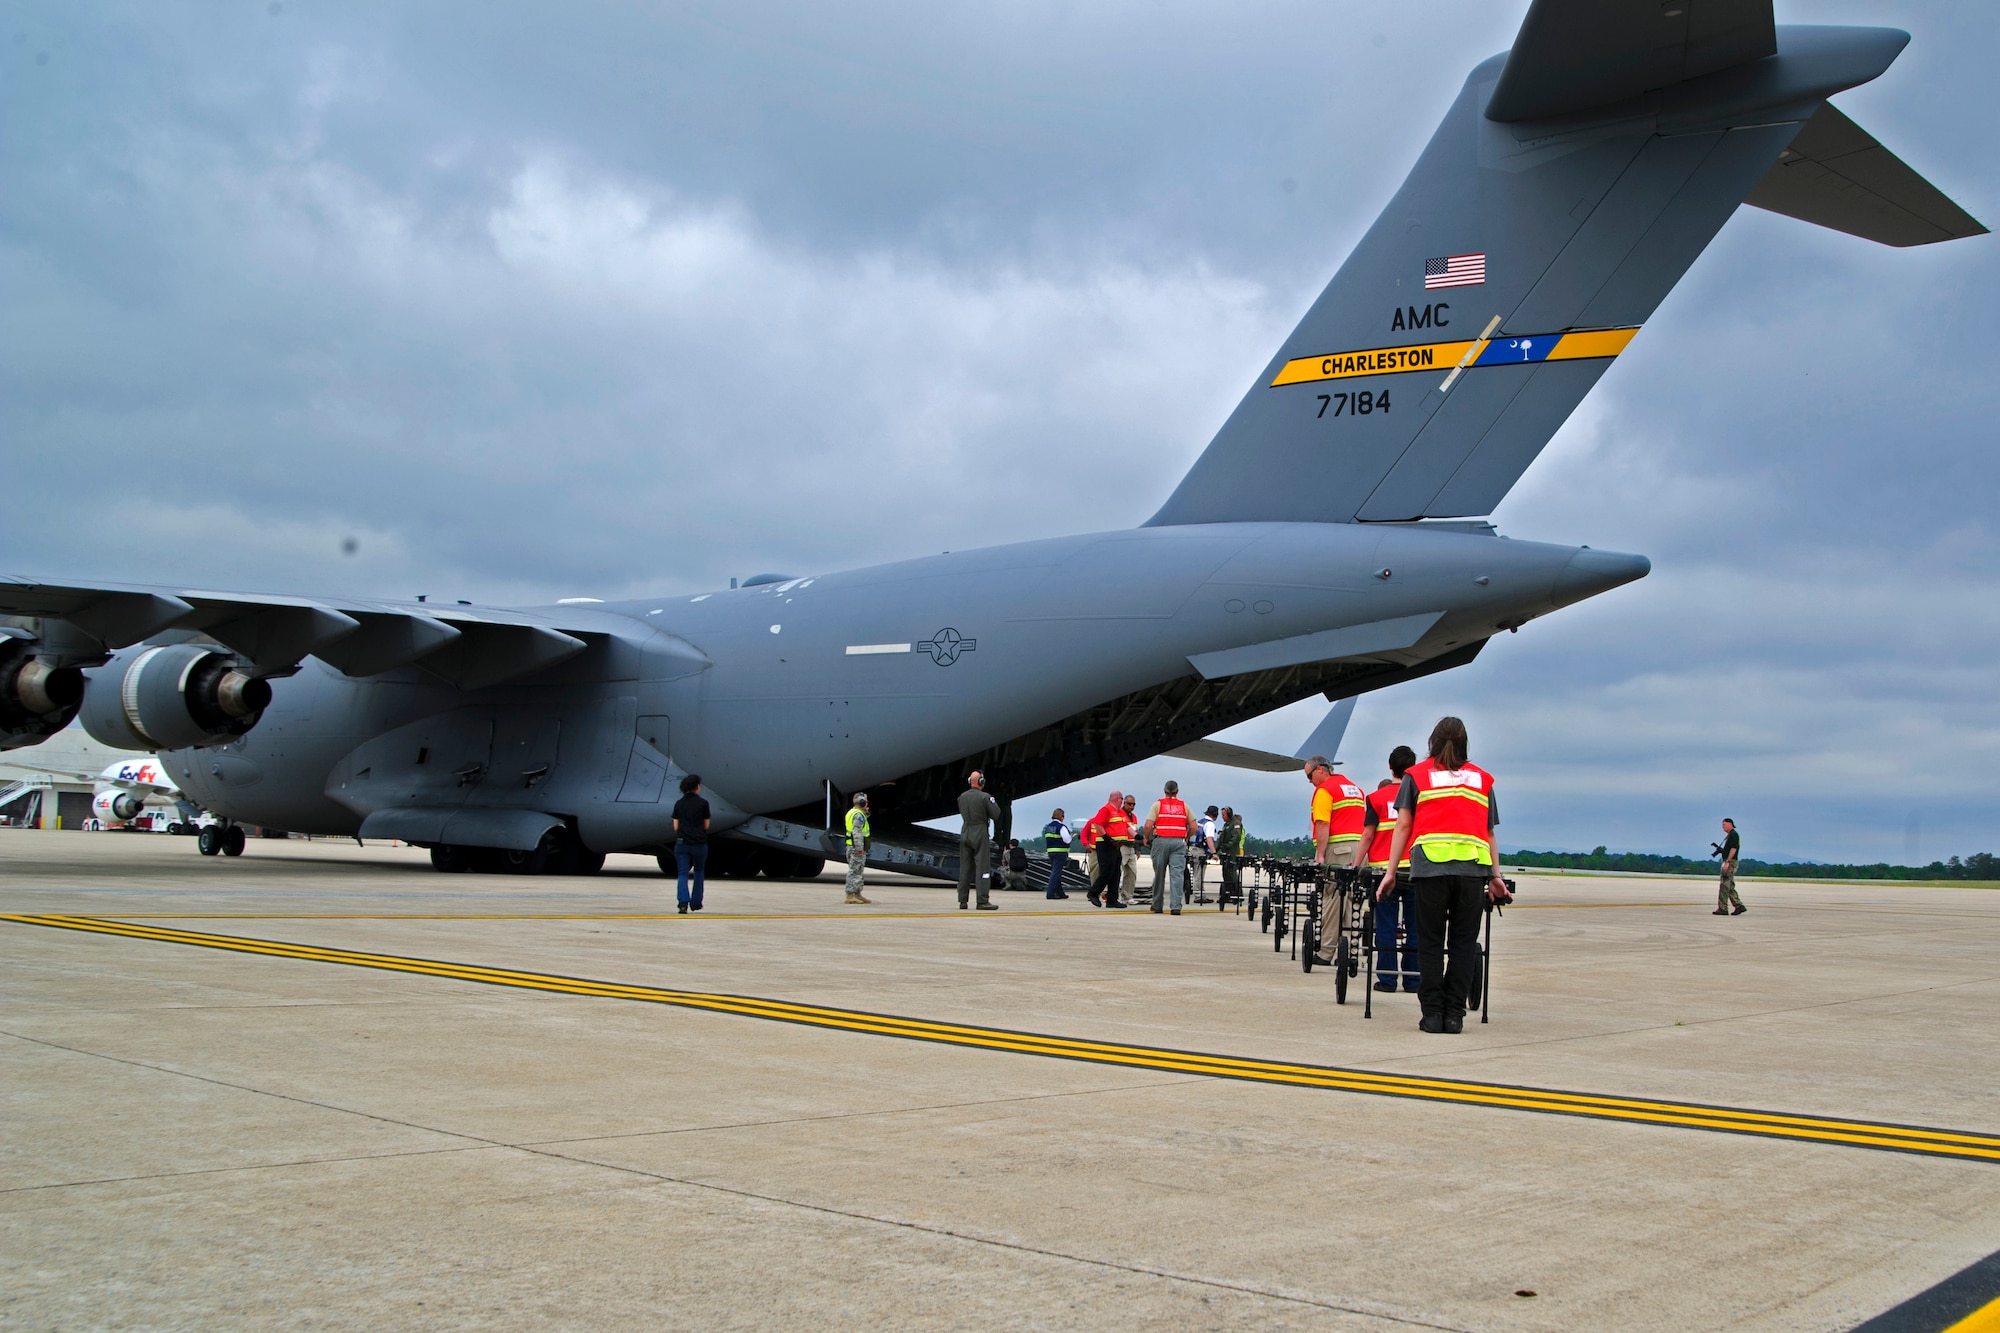 Members of the 315th Aeromedical Evacuation Squadron conduct training operations with the support from Civil Air Patrol volunteers onboard a C-17 Globemaster III, assigned to the 300th Airlift Squadron, near Joint Base Charleston, S.C., May 18, 2016. The squadrons conducted the training to enhance their ability to receive, regulate, transport and track patients to and from Natural Disaster Medical System hospitals near Greenville-Spartanburg International Airport. (U.S. Air Force photo by Senior Airman Jonathan Lane)